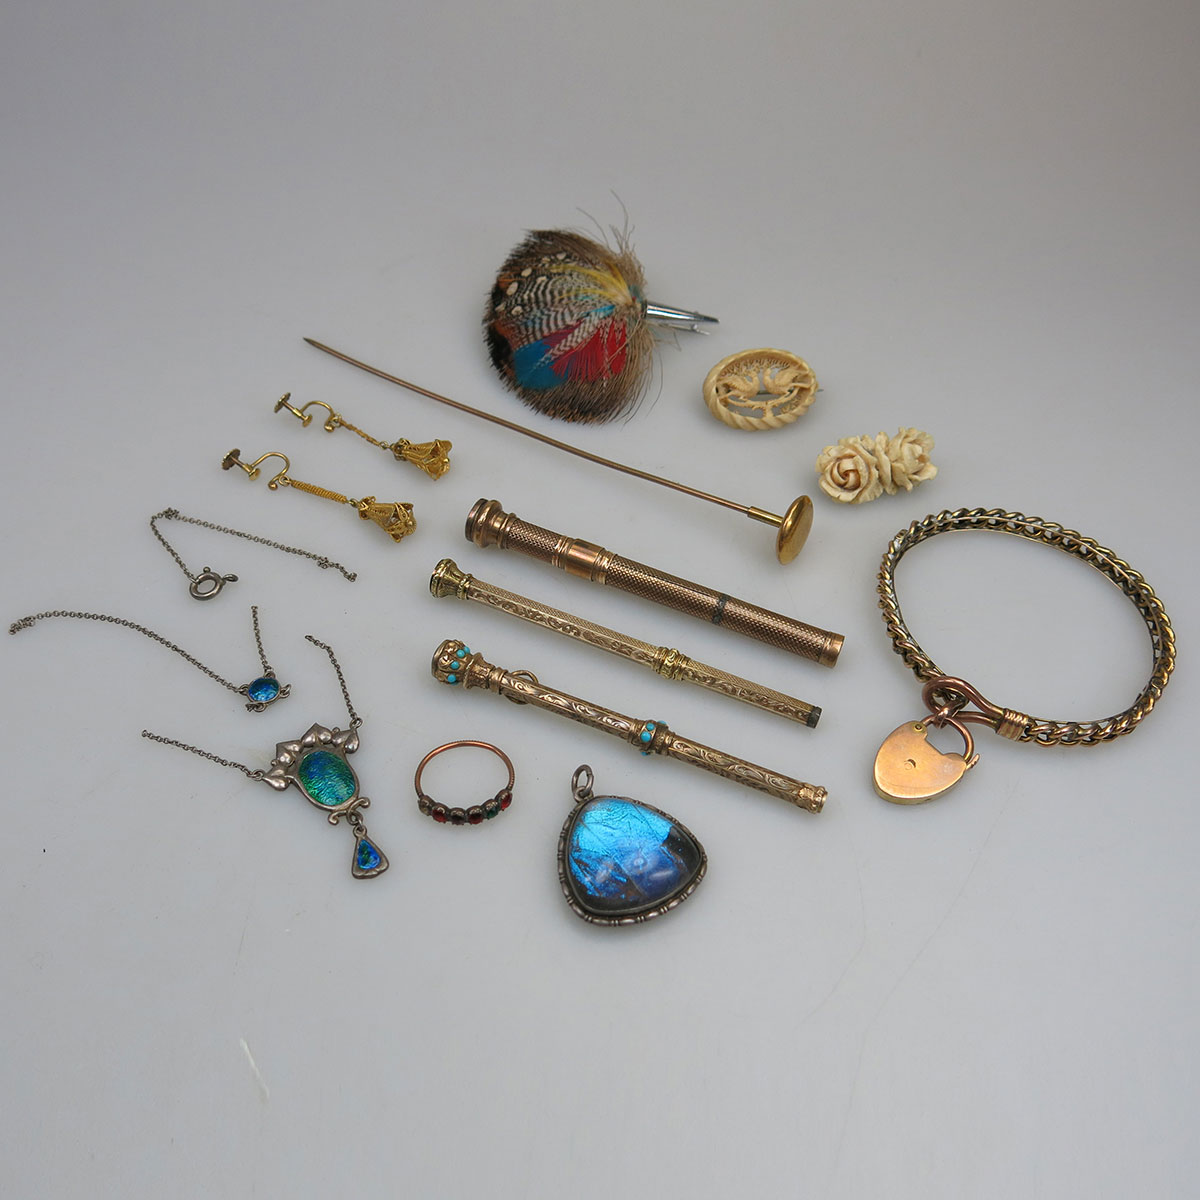 Small Quantity Of Gold, Gold-Filled And Silver Jewellery, Etc